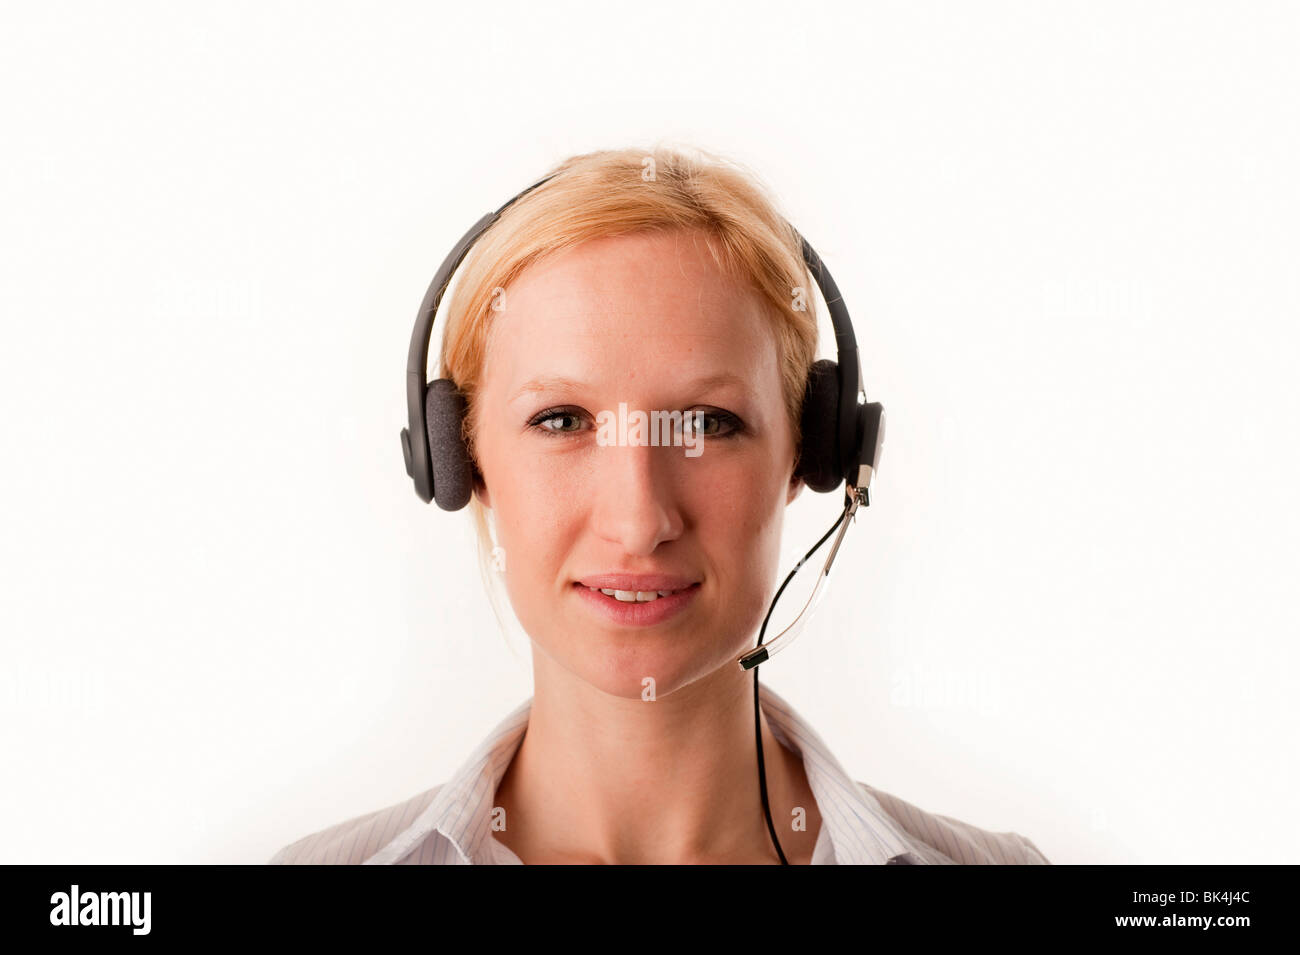 Blonde female Customer Services Telesales person wearing a telephone headset smiling FULLY MODEL RELEASED Stock Photo